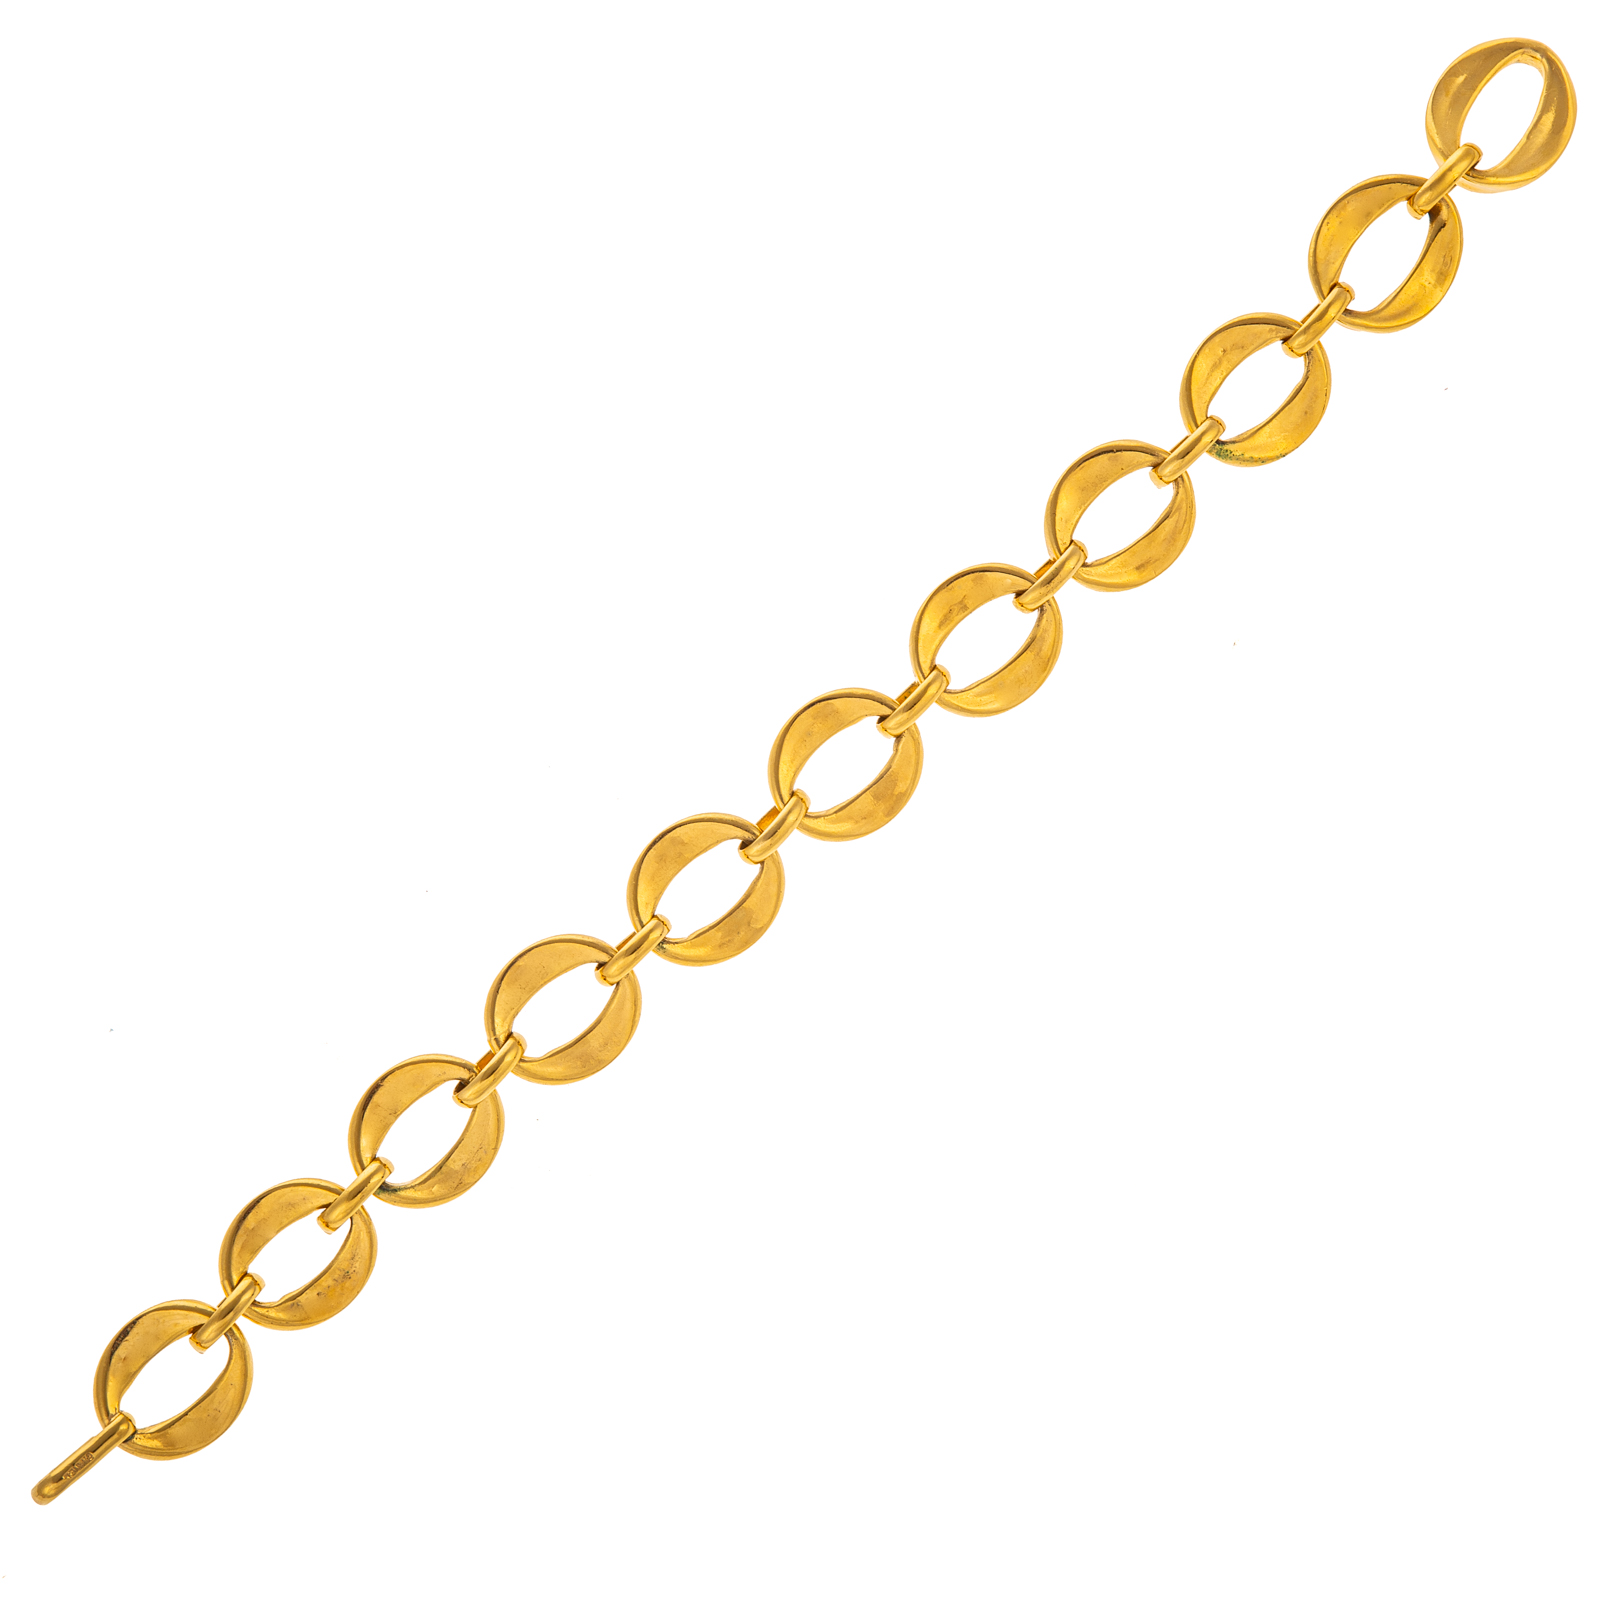 A CHANEL OVAL LINK CHAIN NECKLACE